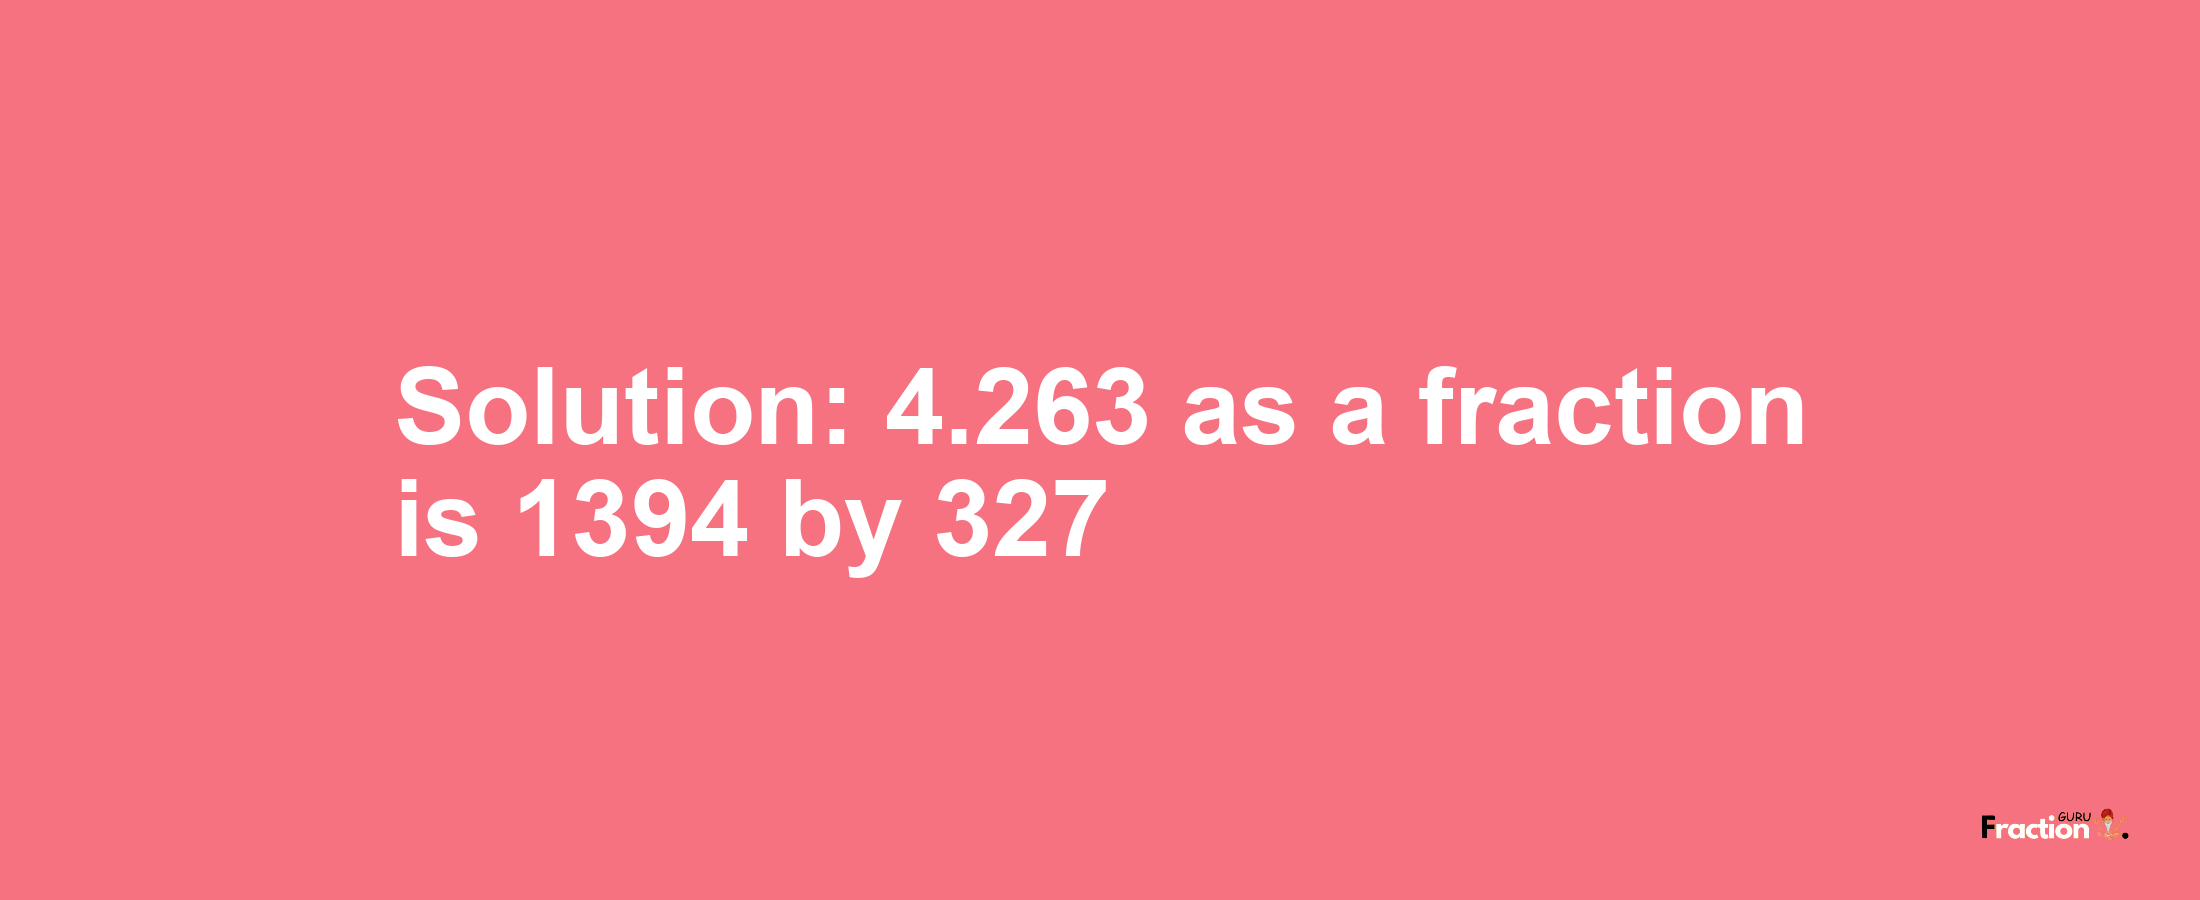 Solution:4.263 as a fraction is 1394/327